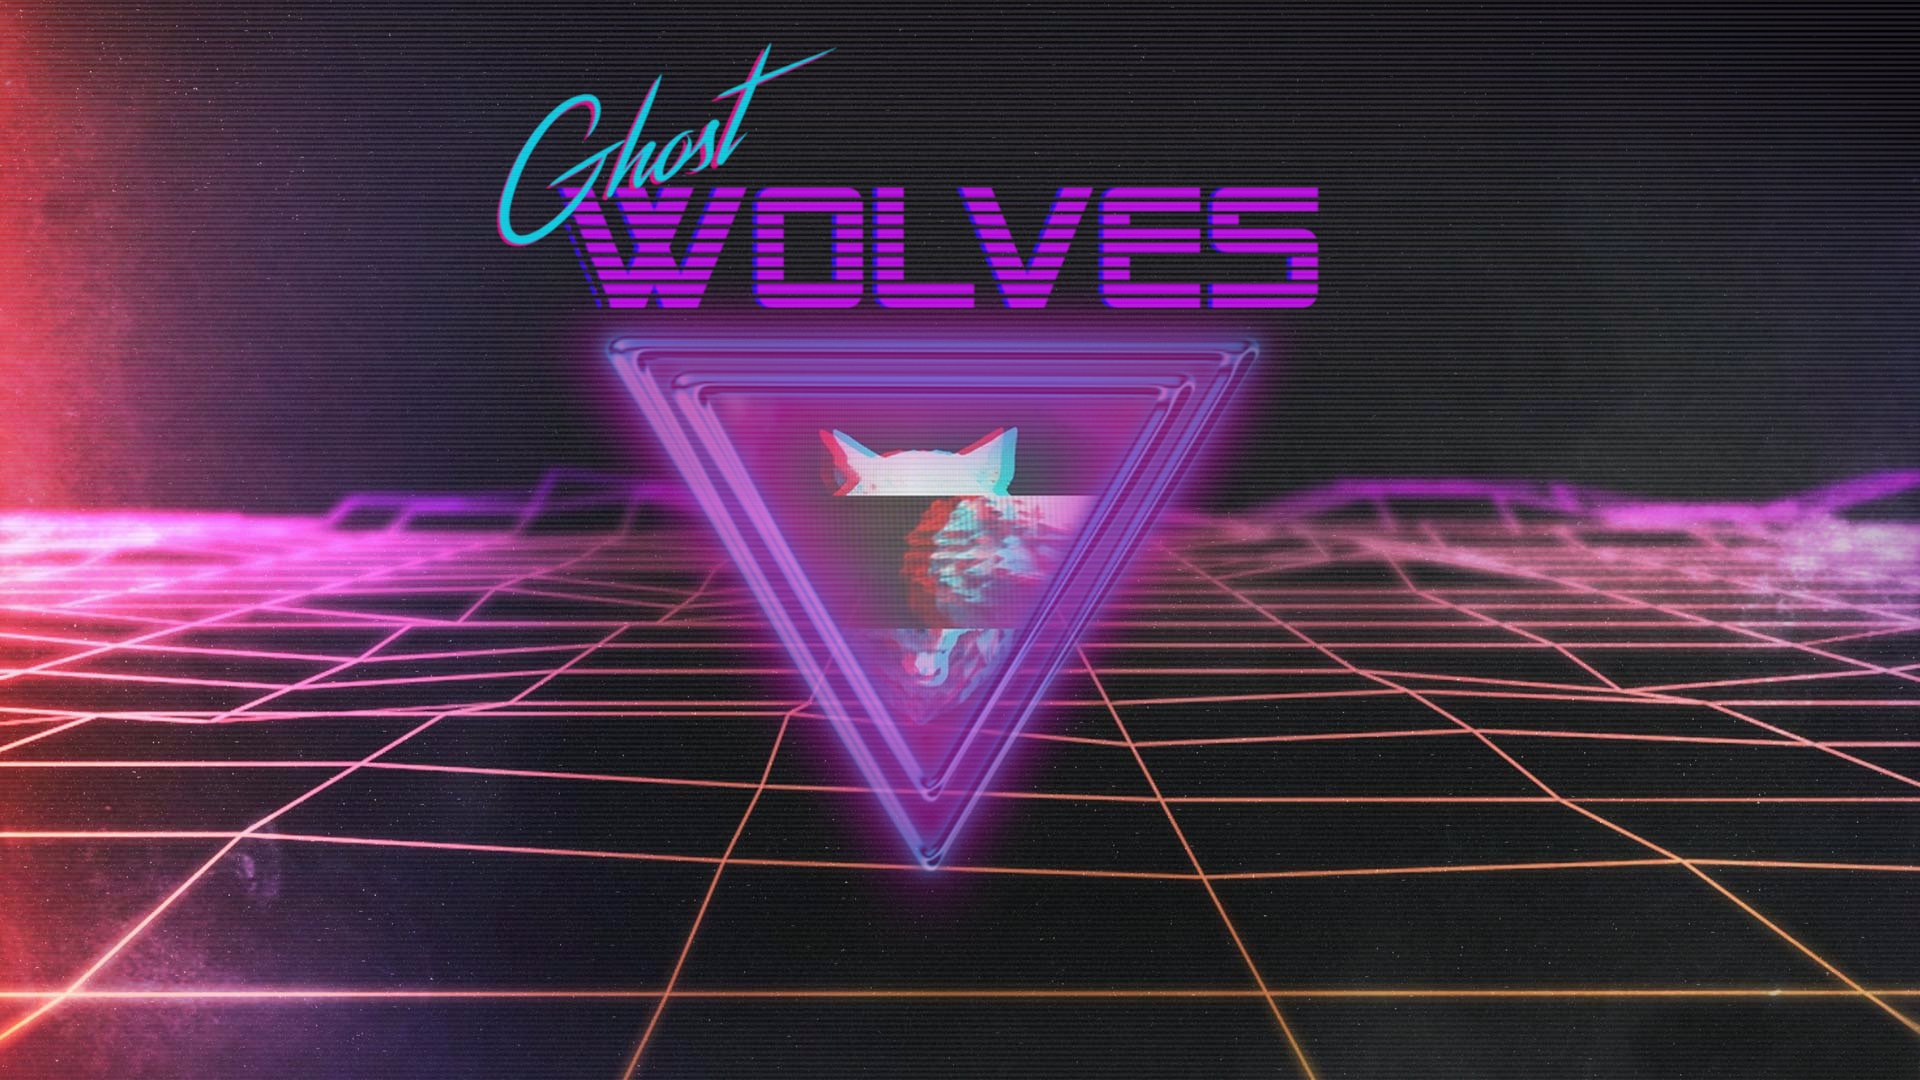 1980s, Synthwave, Wolf, Triangle, Grid, Retro style, Neon, Hotline Miami, Hotline Miami 2: Wrong Number, Hotline Miami 2, Video games, VHS, New Retro Wave Wallpaper